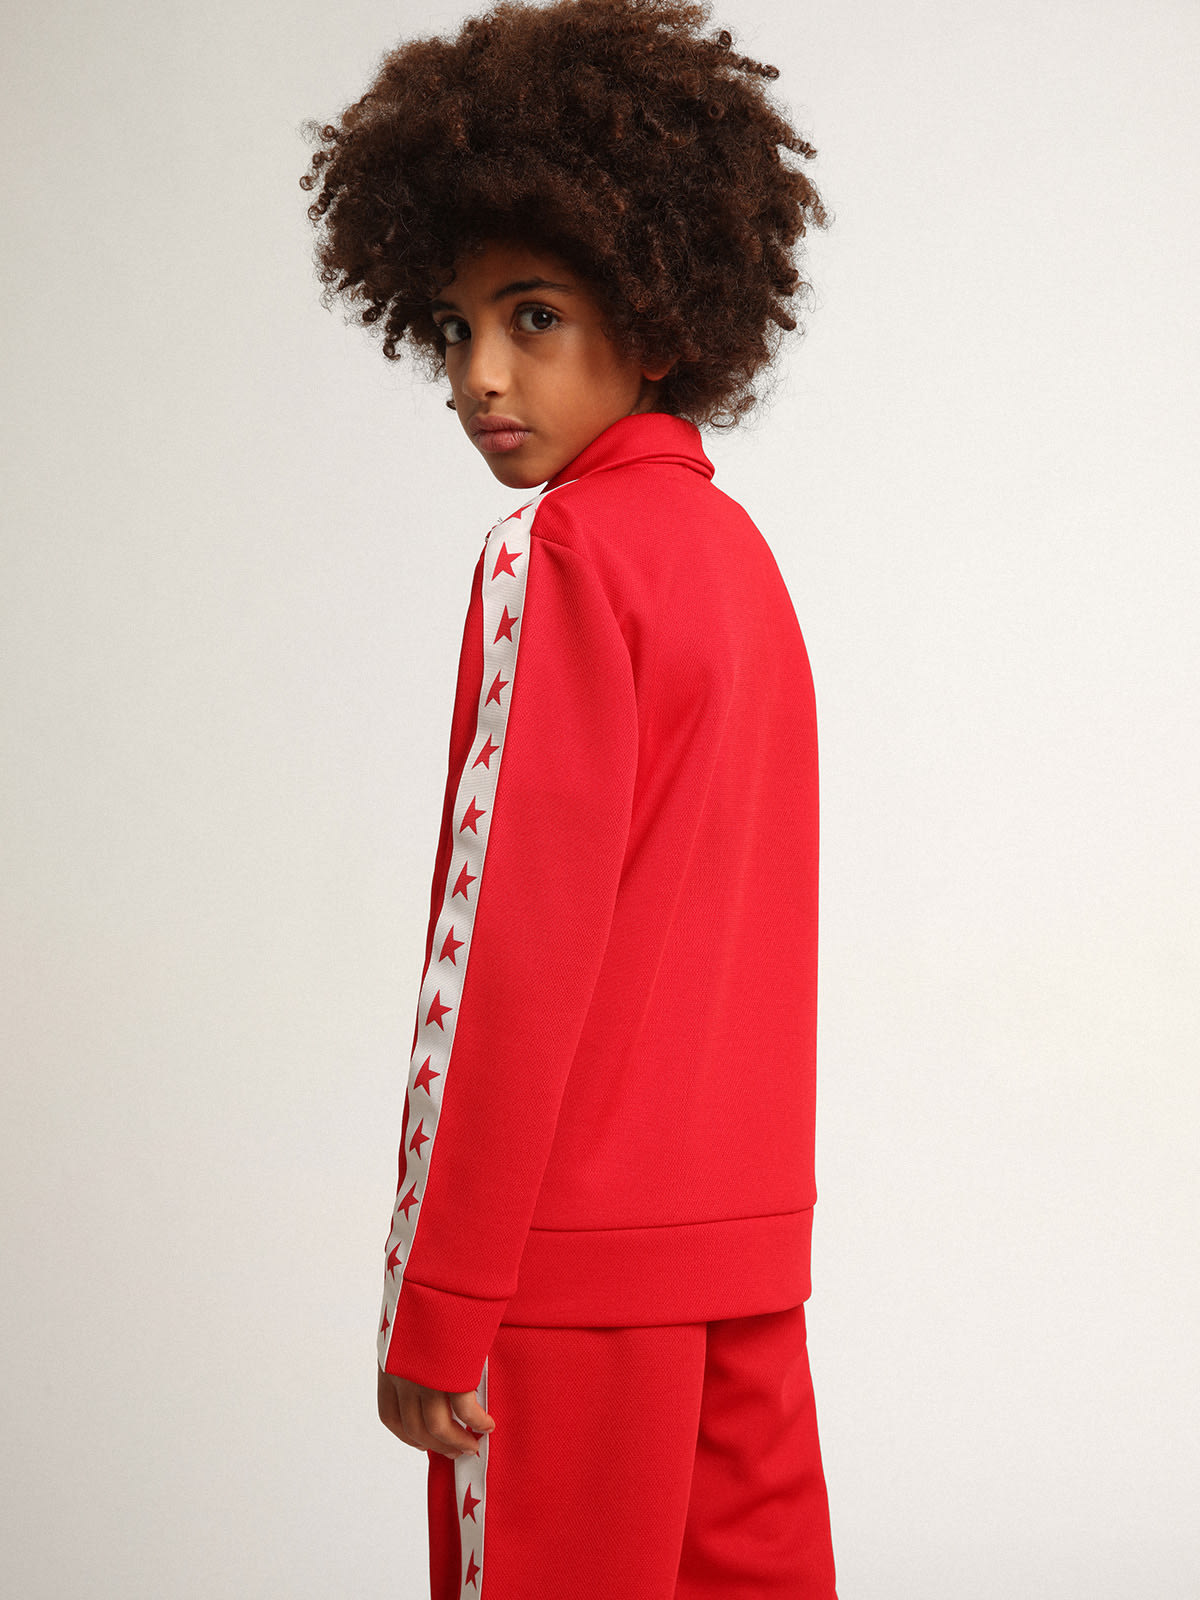 Golden Goose - Kids’ red zipped sweatshirt with contrasting red stars in 